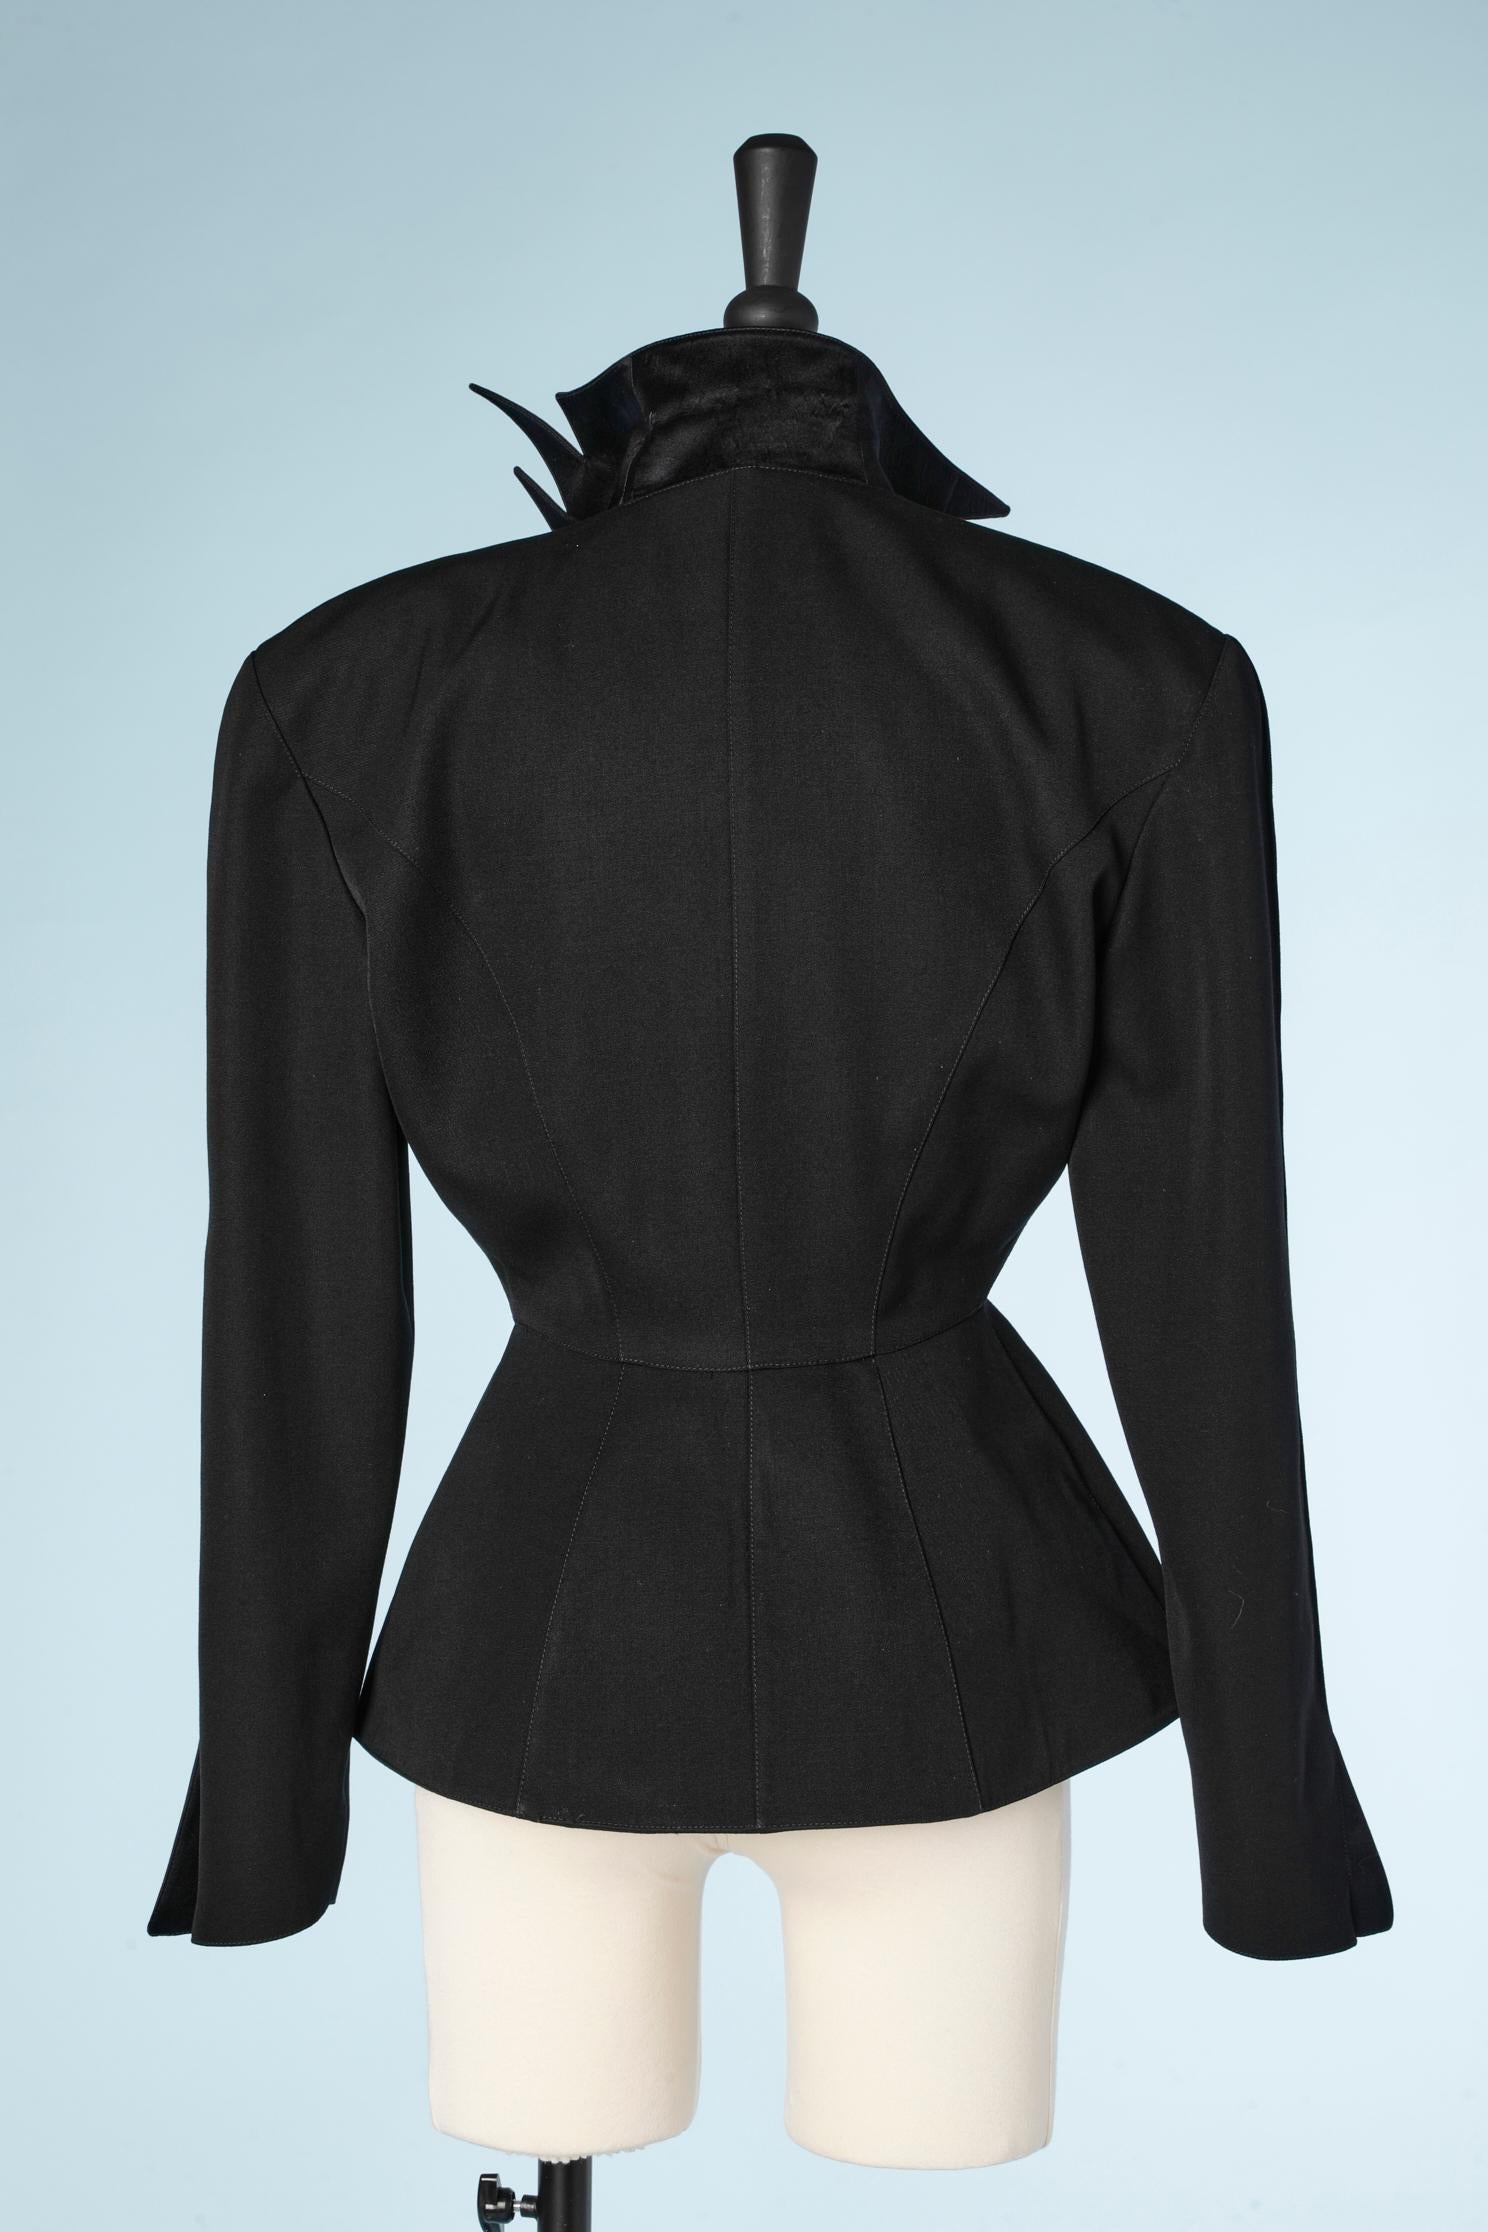  Black jacket with notched satin collar  Thierry Mugler  For Sale 4